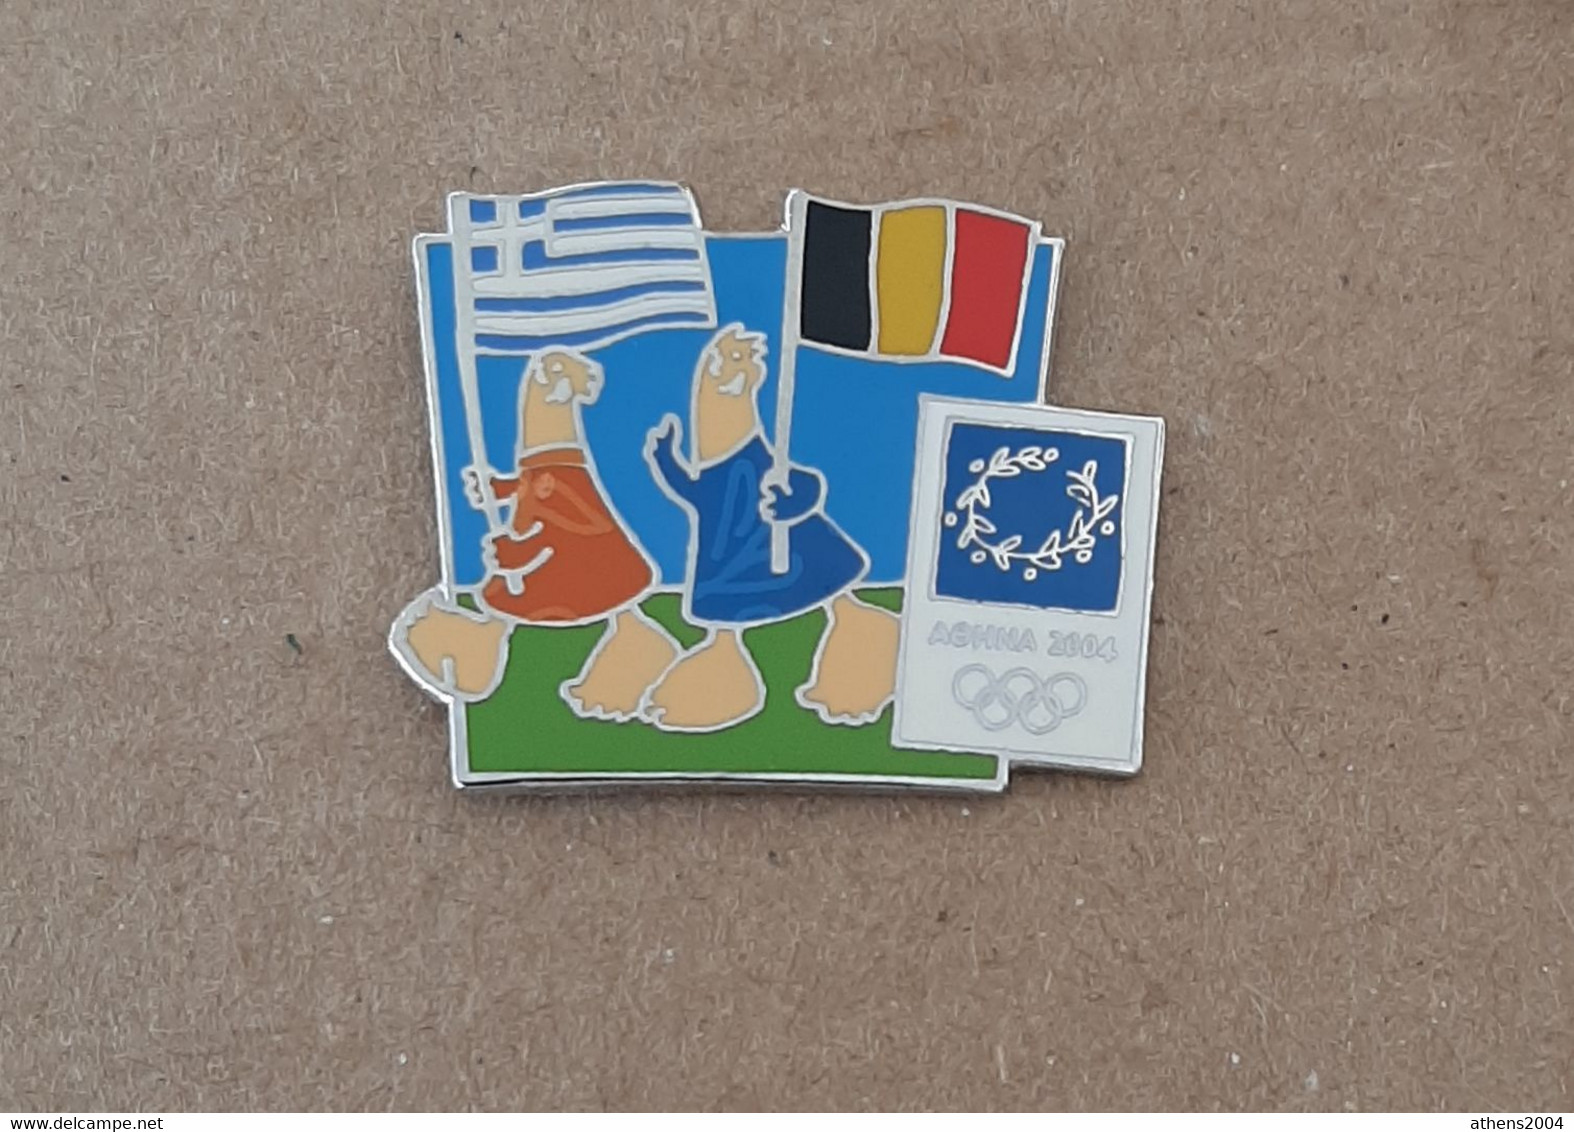 Athens 2004 Olympic Games - Mascots With E.U. Flags, Greece - Belgium Flags Pin - Jeux Olympiques